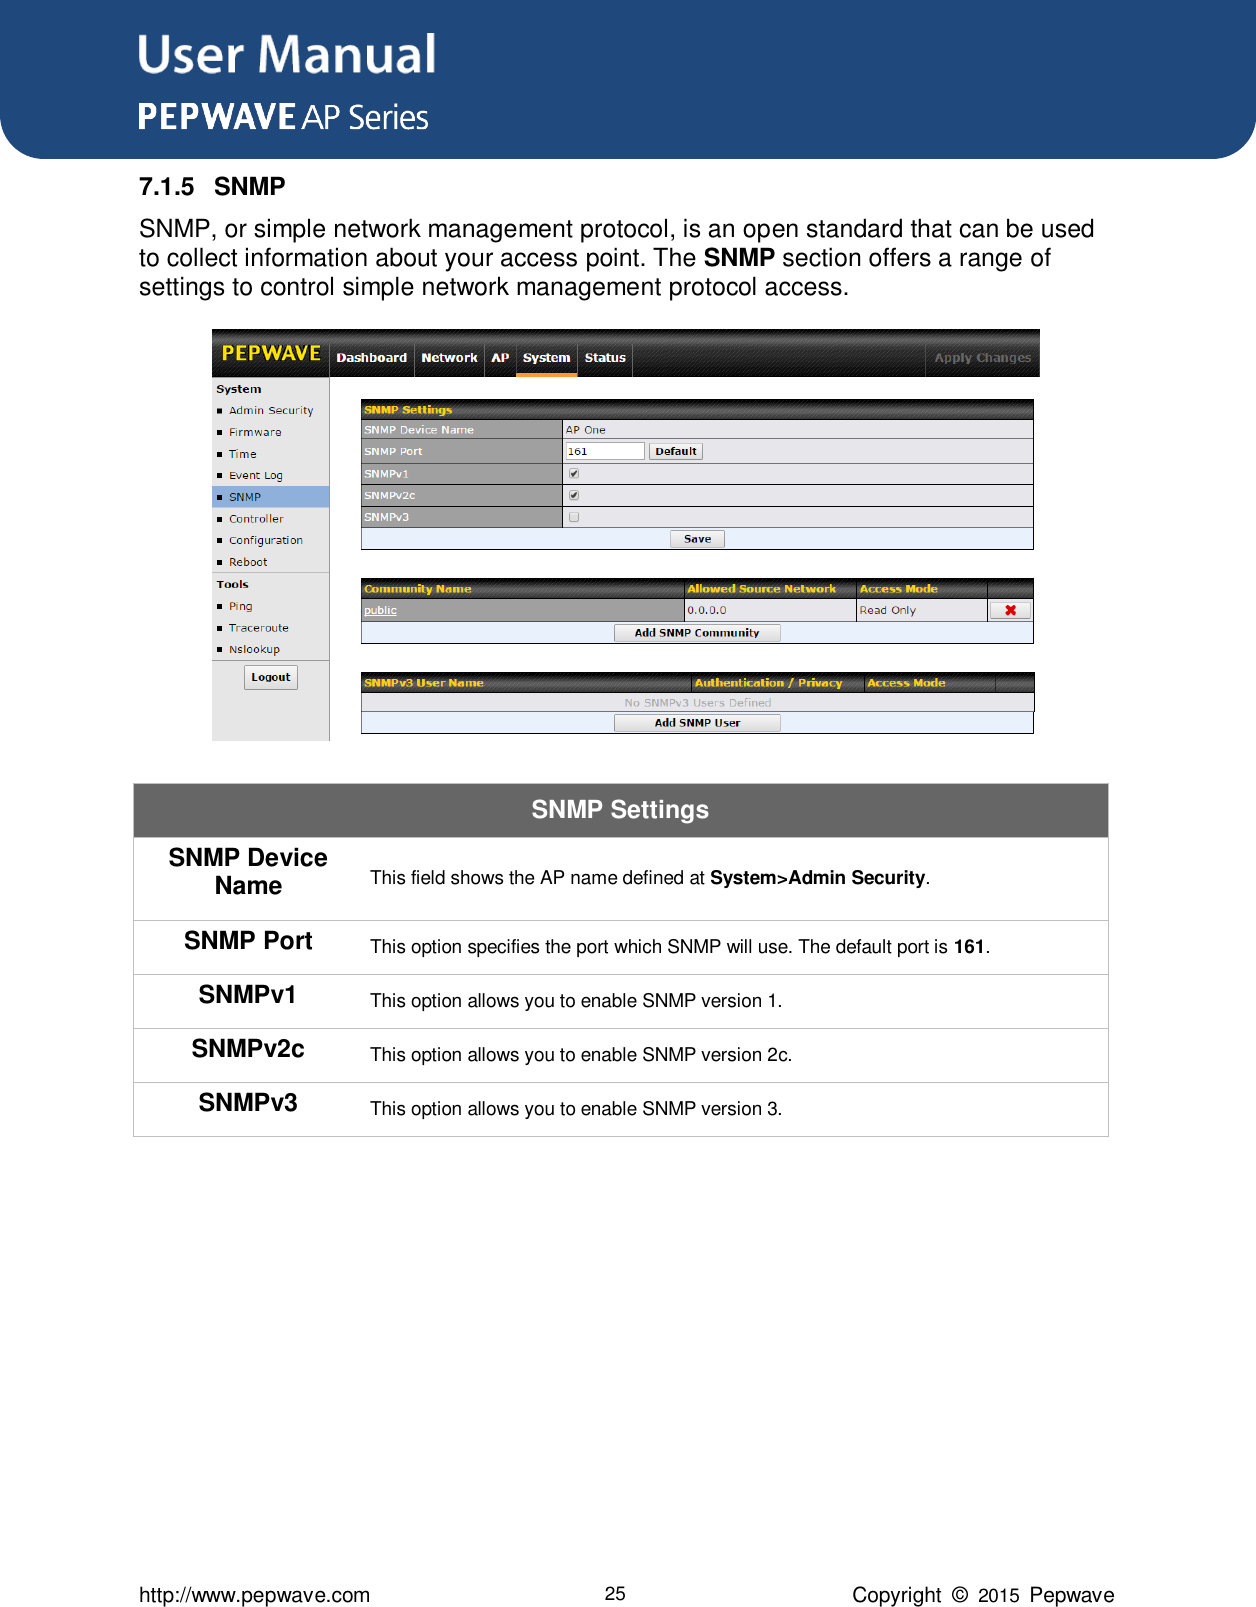 User Manual      http://www.pepwave.com 25 Copyright  ©  2015  Pepwave 7.1.5  SNMP SNMP, or simple network management protocol, is an open standard that can be used to collect information about your access point. The SNMP section offers a range of settings to control simple network management protocol access.  SNMP Settings SNMP Device Name This field shows the AP name defined at System&gt;Admin Security. SNMP Port This option specifies the port which SNMP will use. The default port is 161. SNMPv1 This option allows you to enable SNMP version 1. SNMPv2c This option allows you to enable SNMP version 2c. SNMPv3 This option allows you to enable SNMP version 3.          